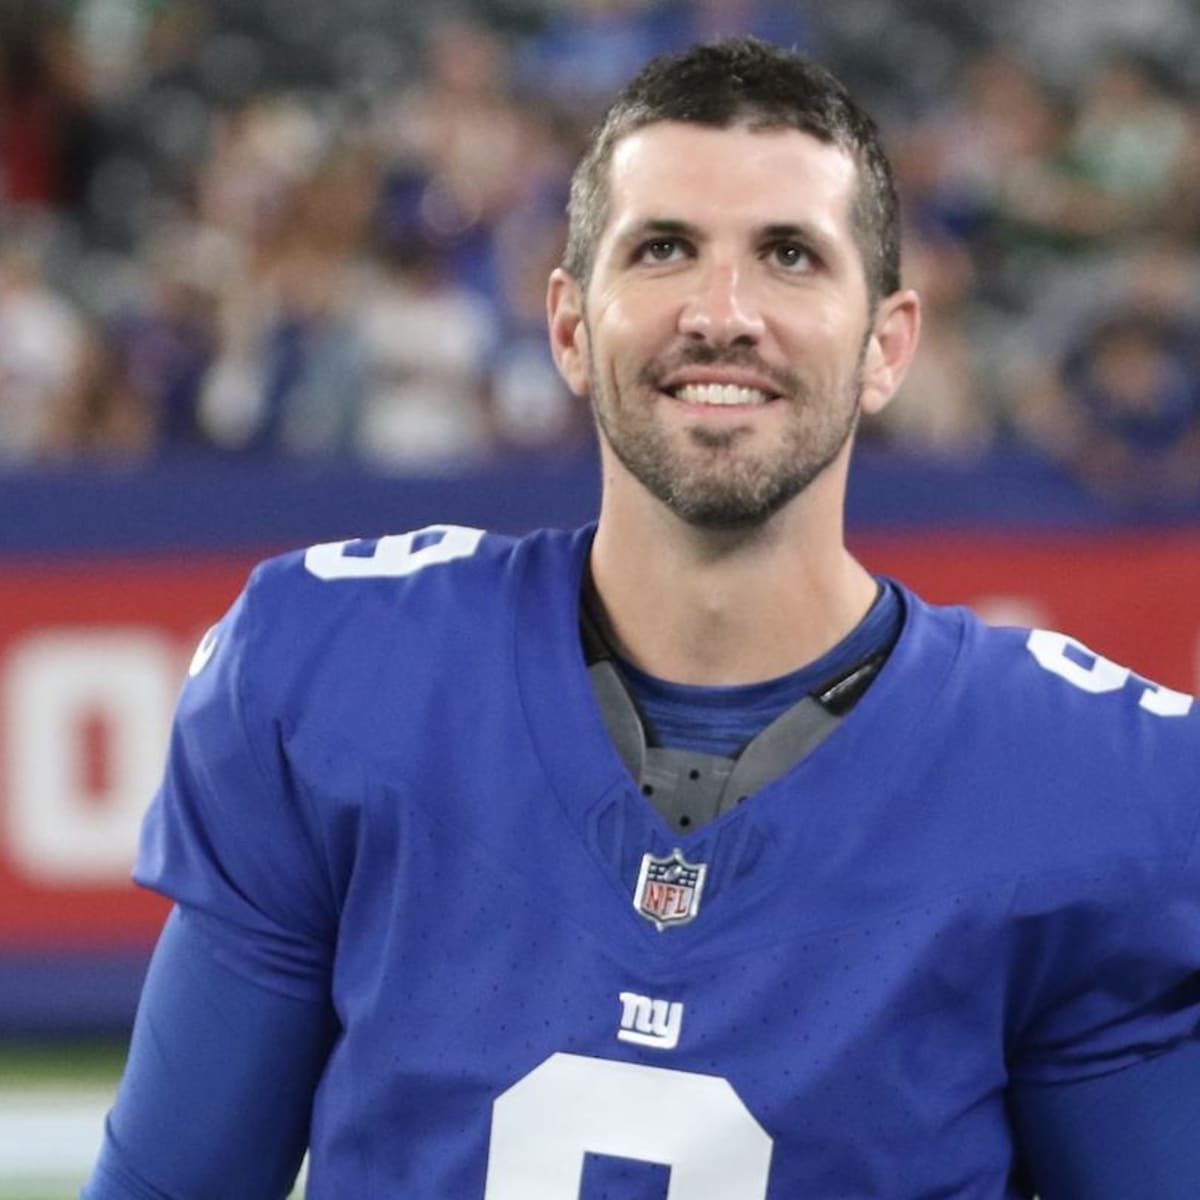 Giants sign kicker Graham Gano to $16.5 million contract before Week 1